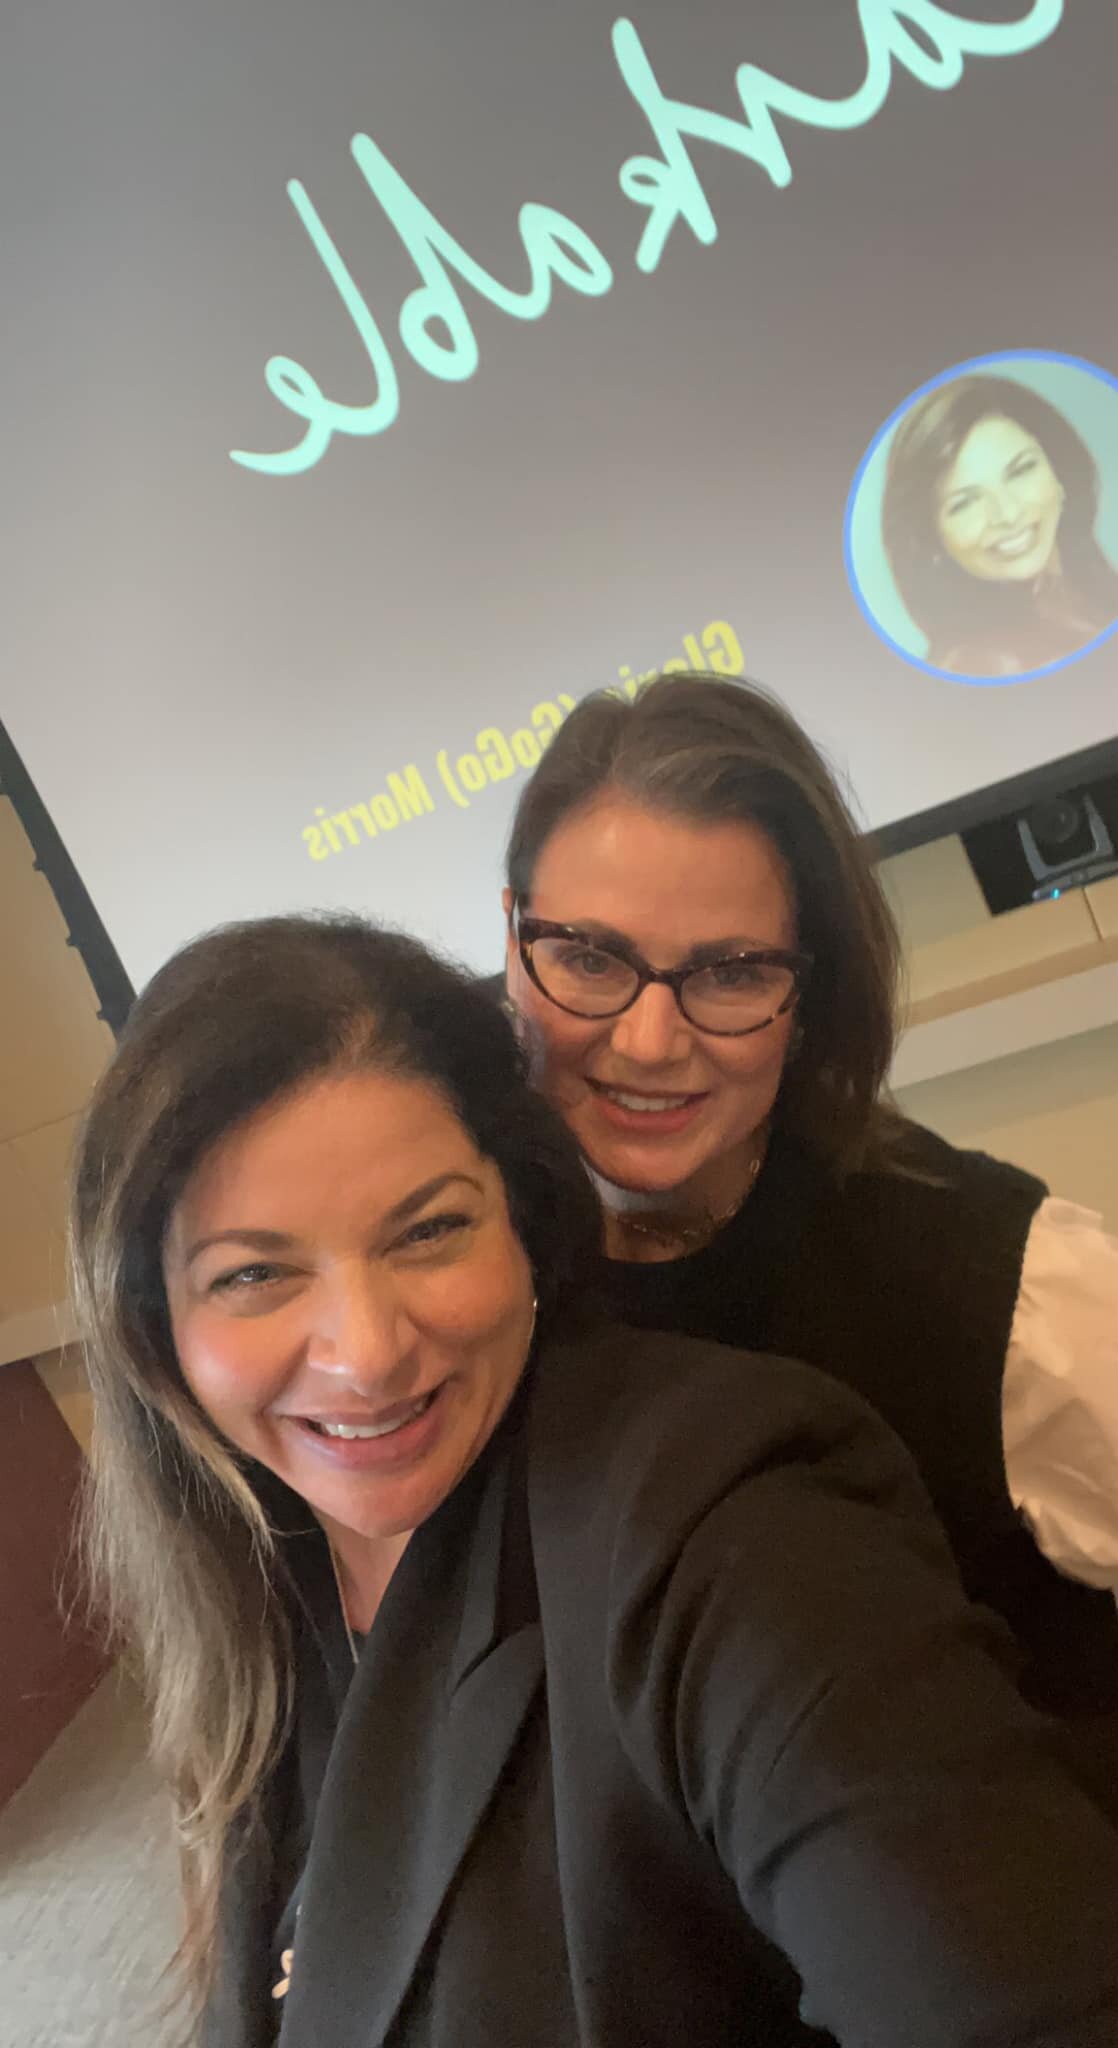 Everyone knows I love to facilitate Google&rsquo;s IamRemarkable workshop but today was a special one indeed as it was for my bestie Linda Sturges and her administration at IU Health in Indianapolis. Loved meeting the team and watching their own conn